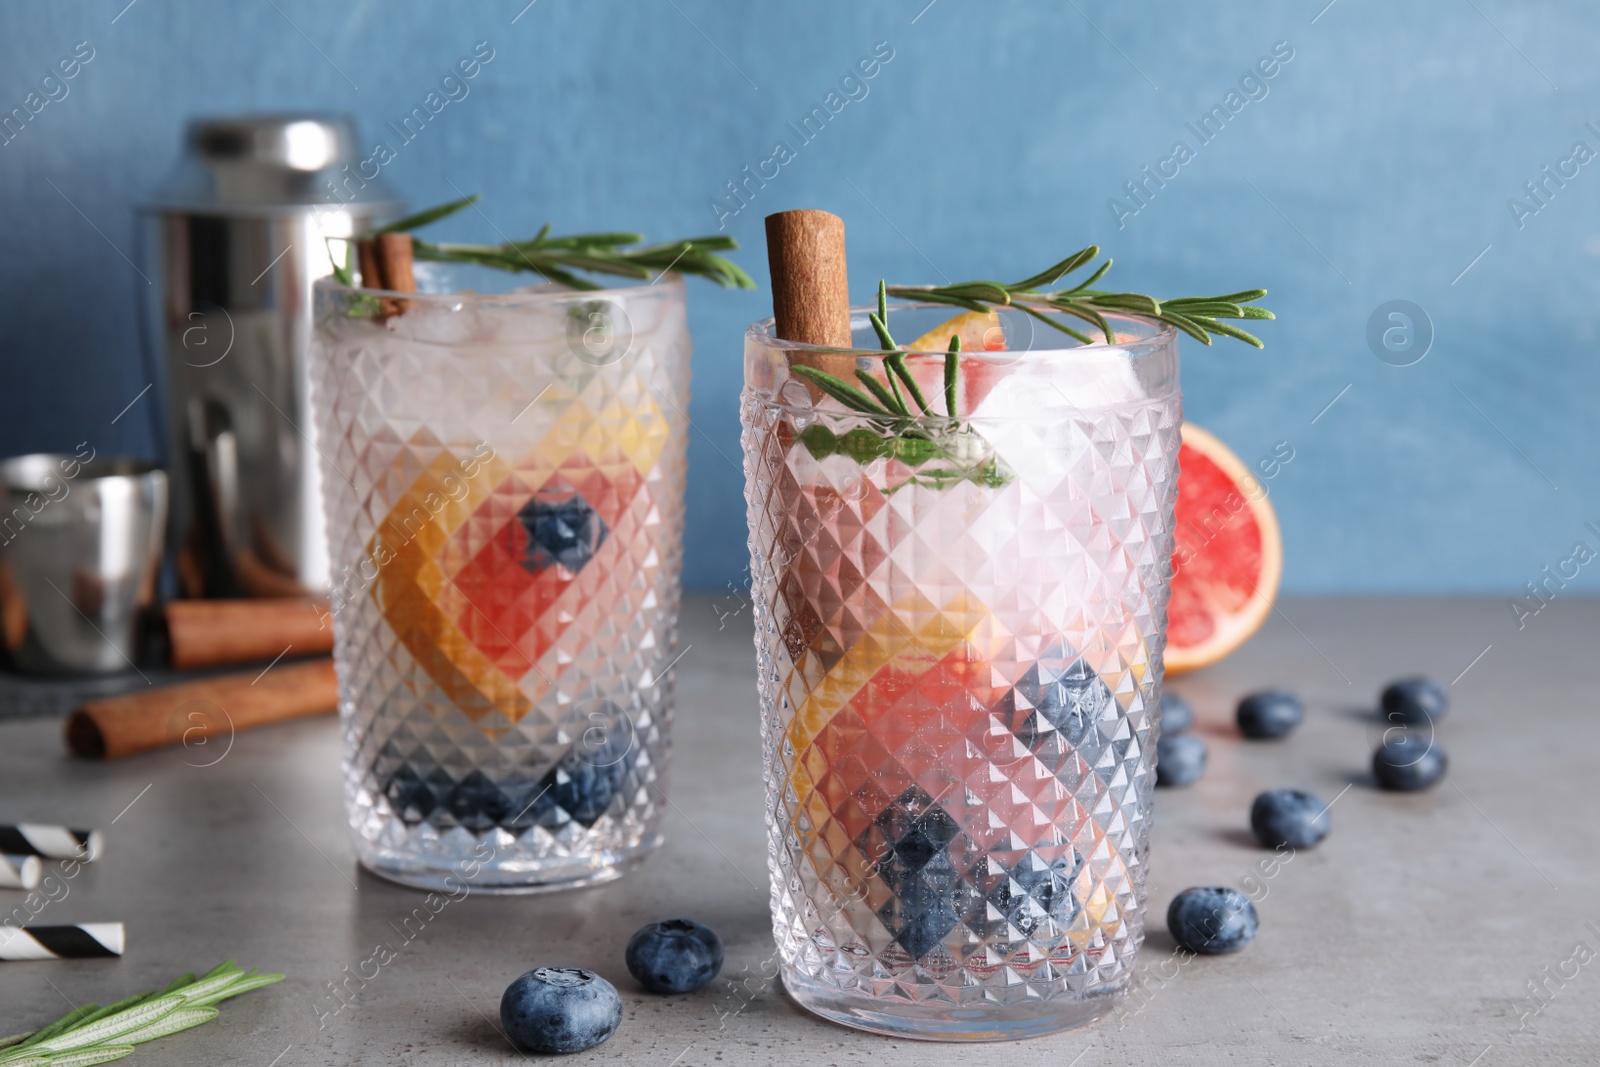 Photo of Tasty refreshing grapefruit cocktail with rosemary on table